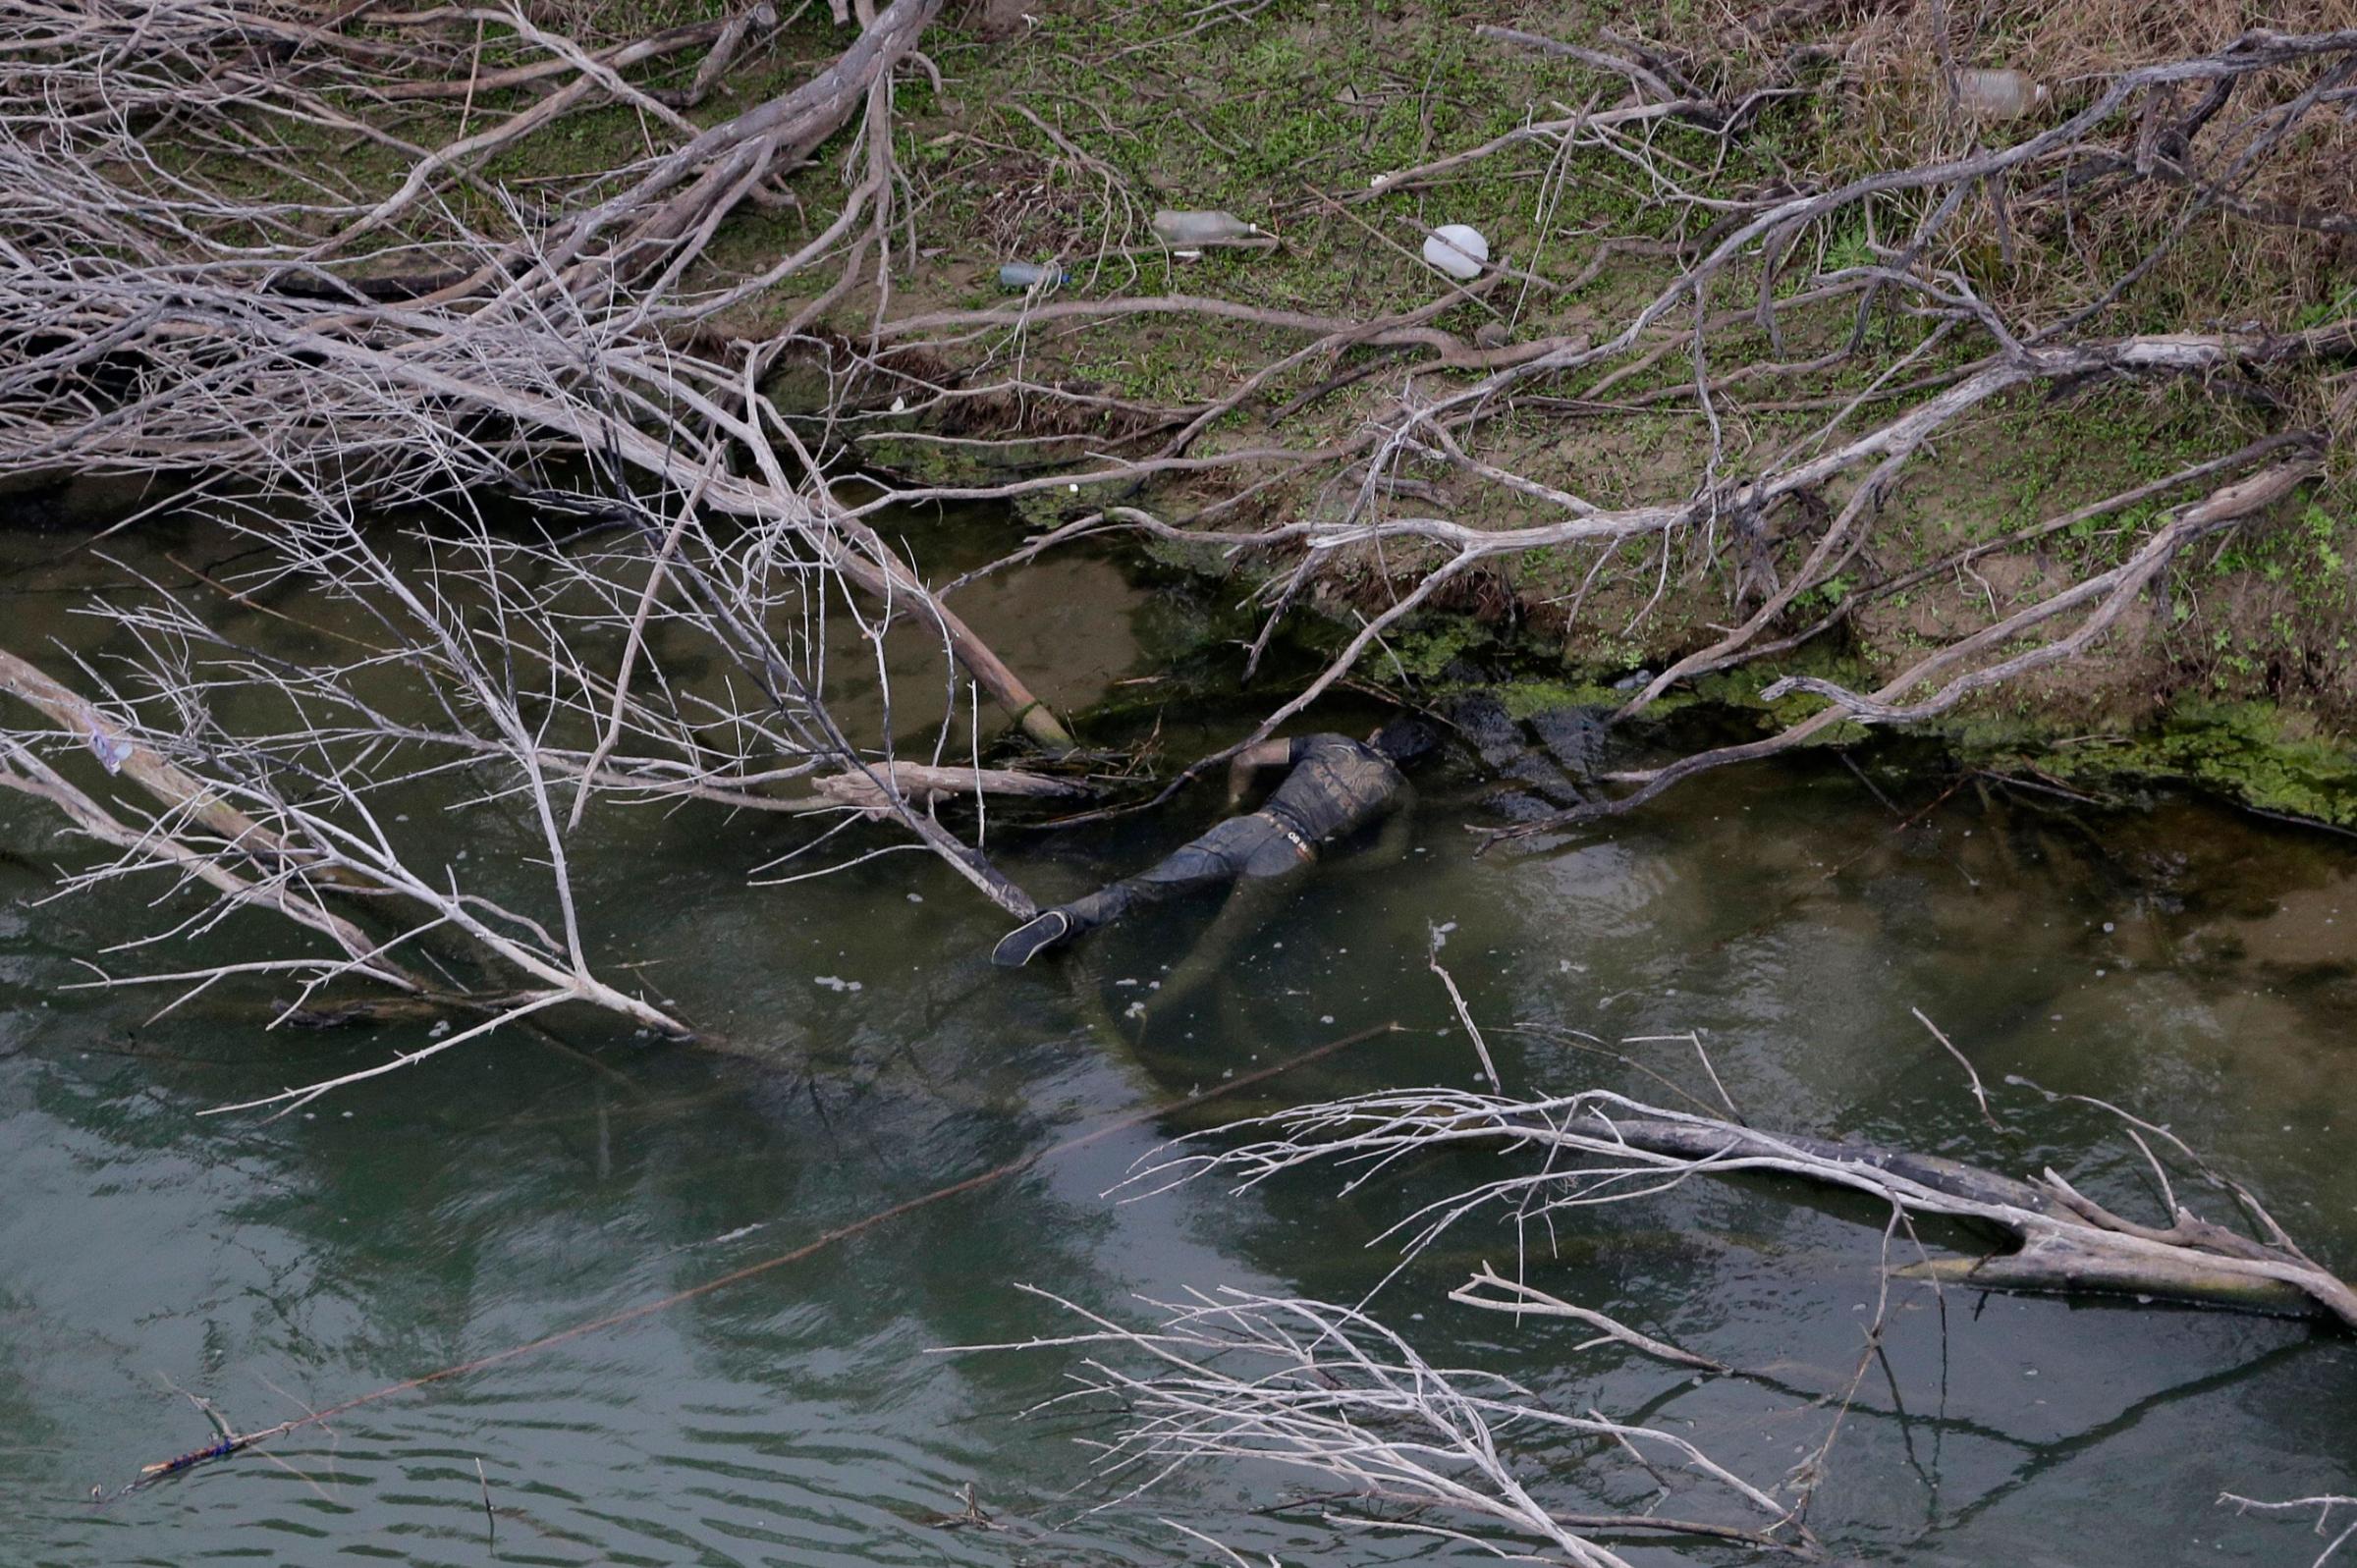 A body discovered by the U.S. Customs and Border Protection Air and Marine while on patrol near the Texas-Mexico border floats in the Rio Grande, in Rio Grande City, Texas.